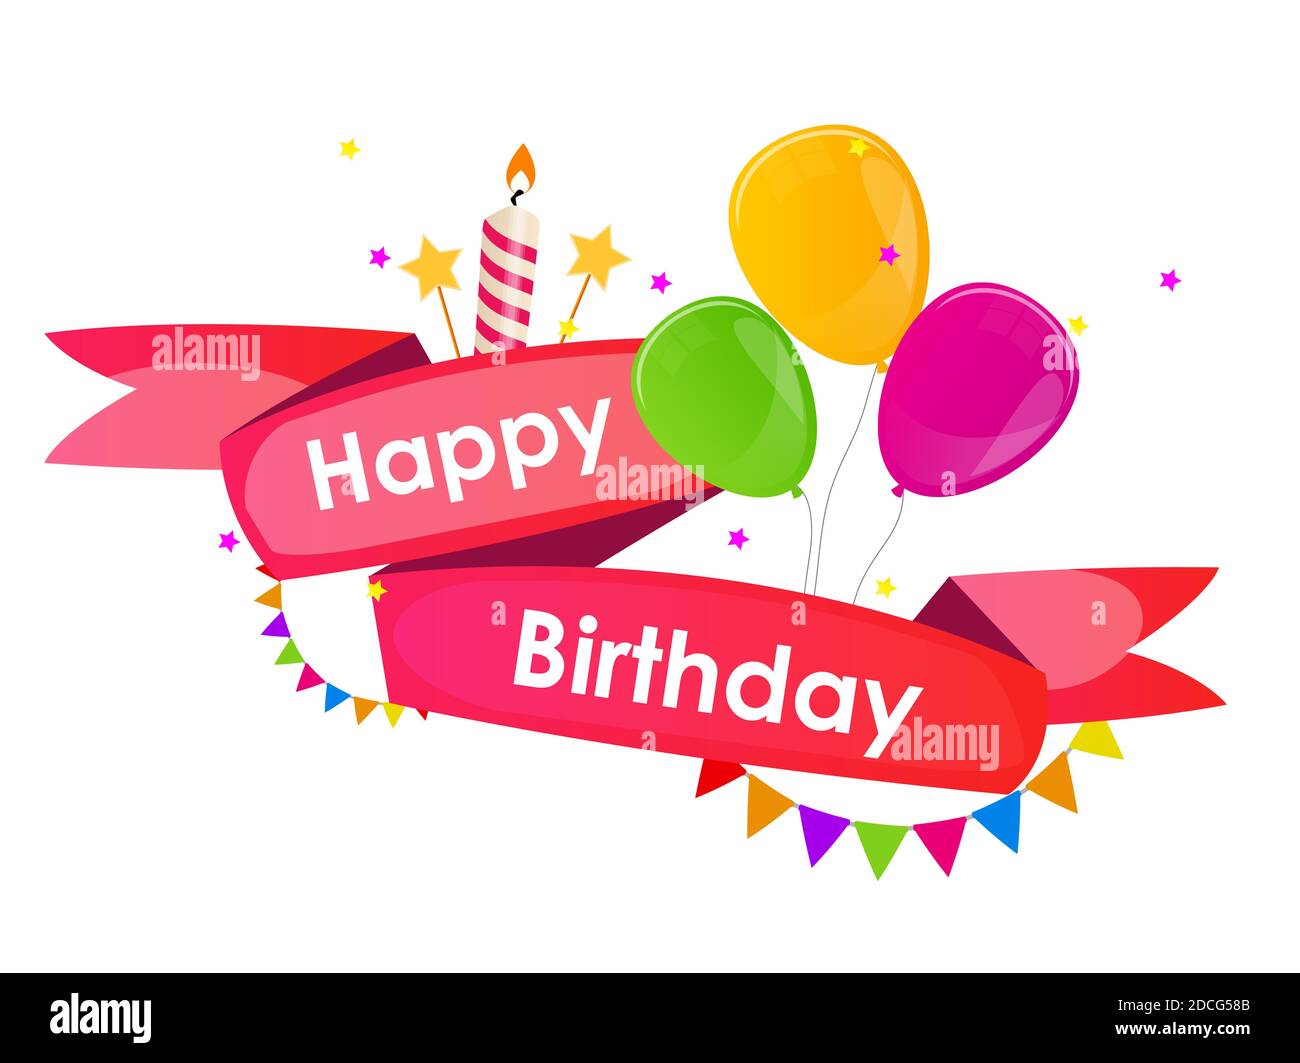 happy-birthday-card-template-with-balloons-illustration-stock-photo-alamy